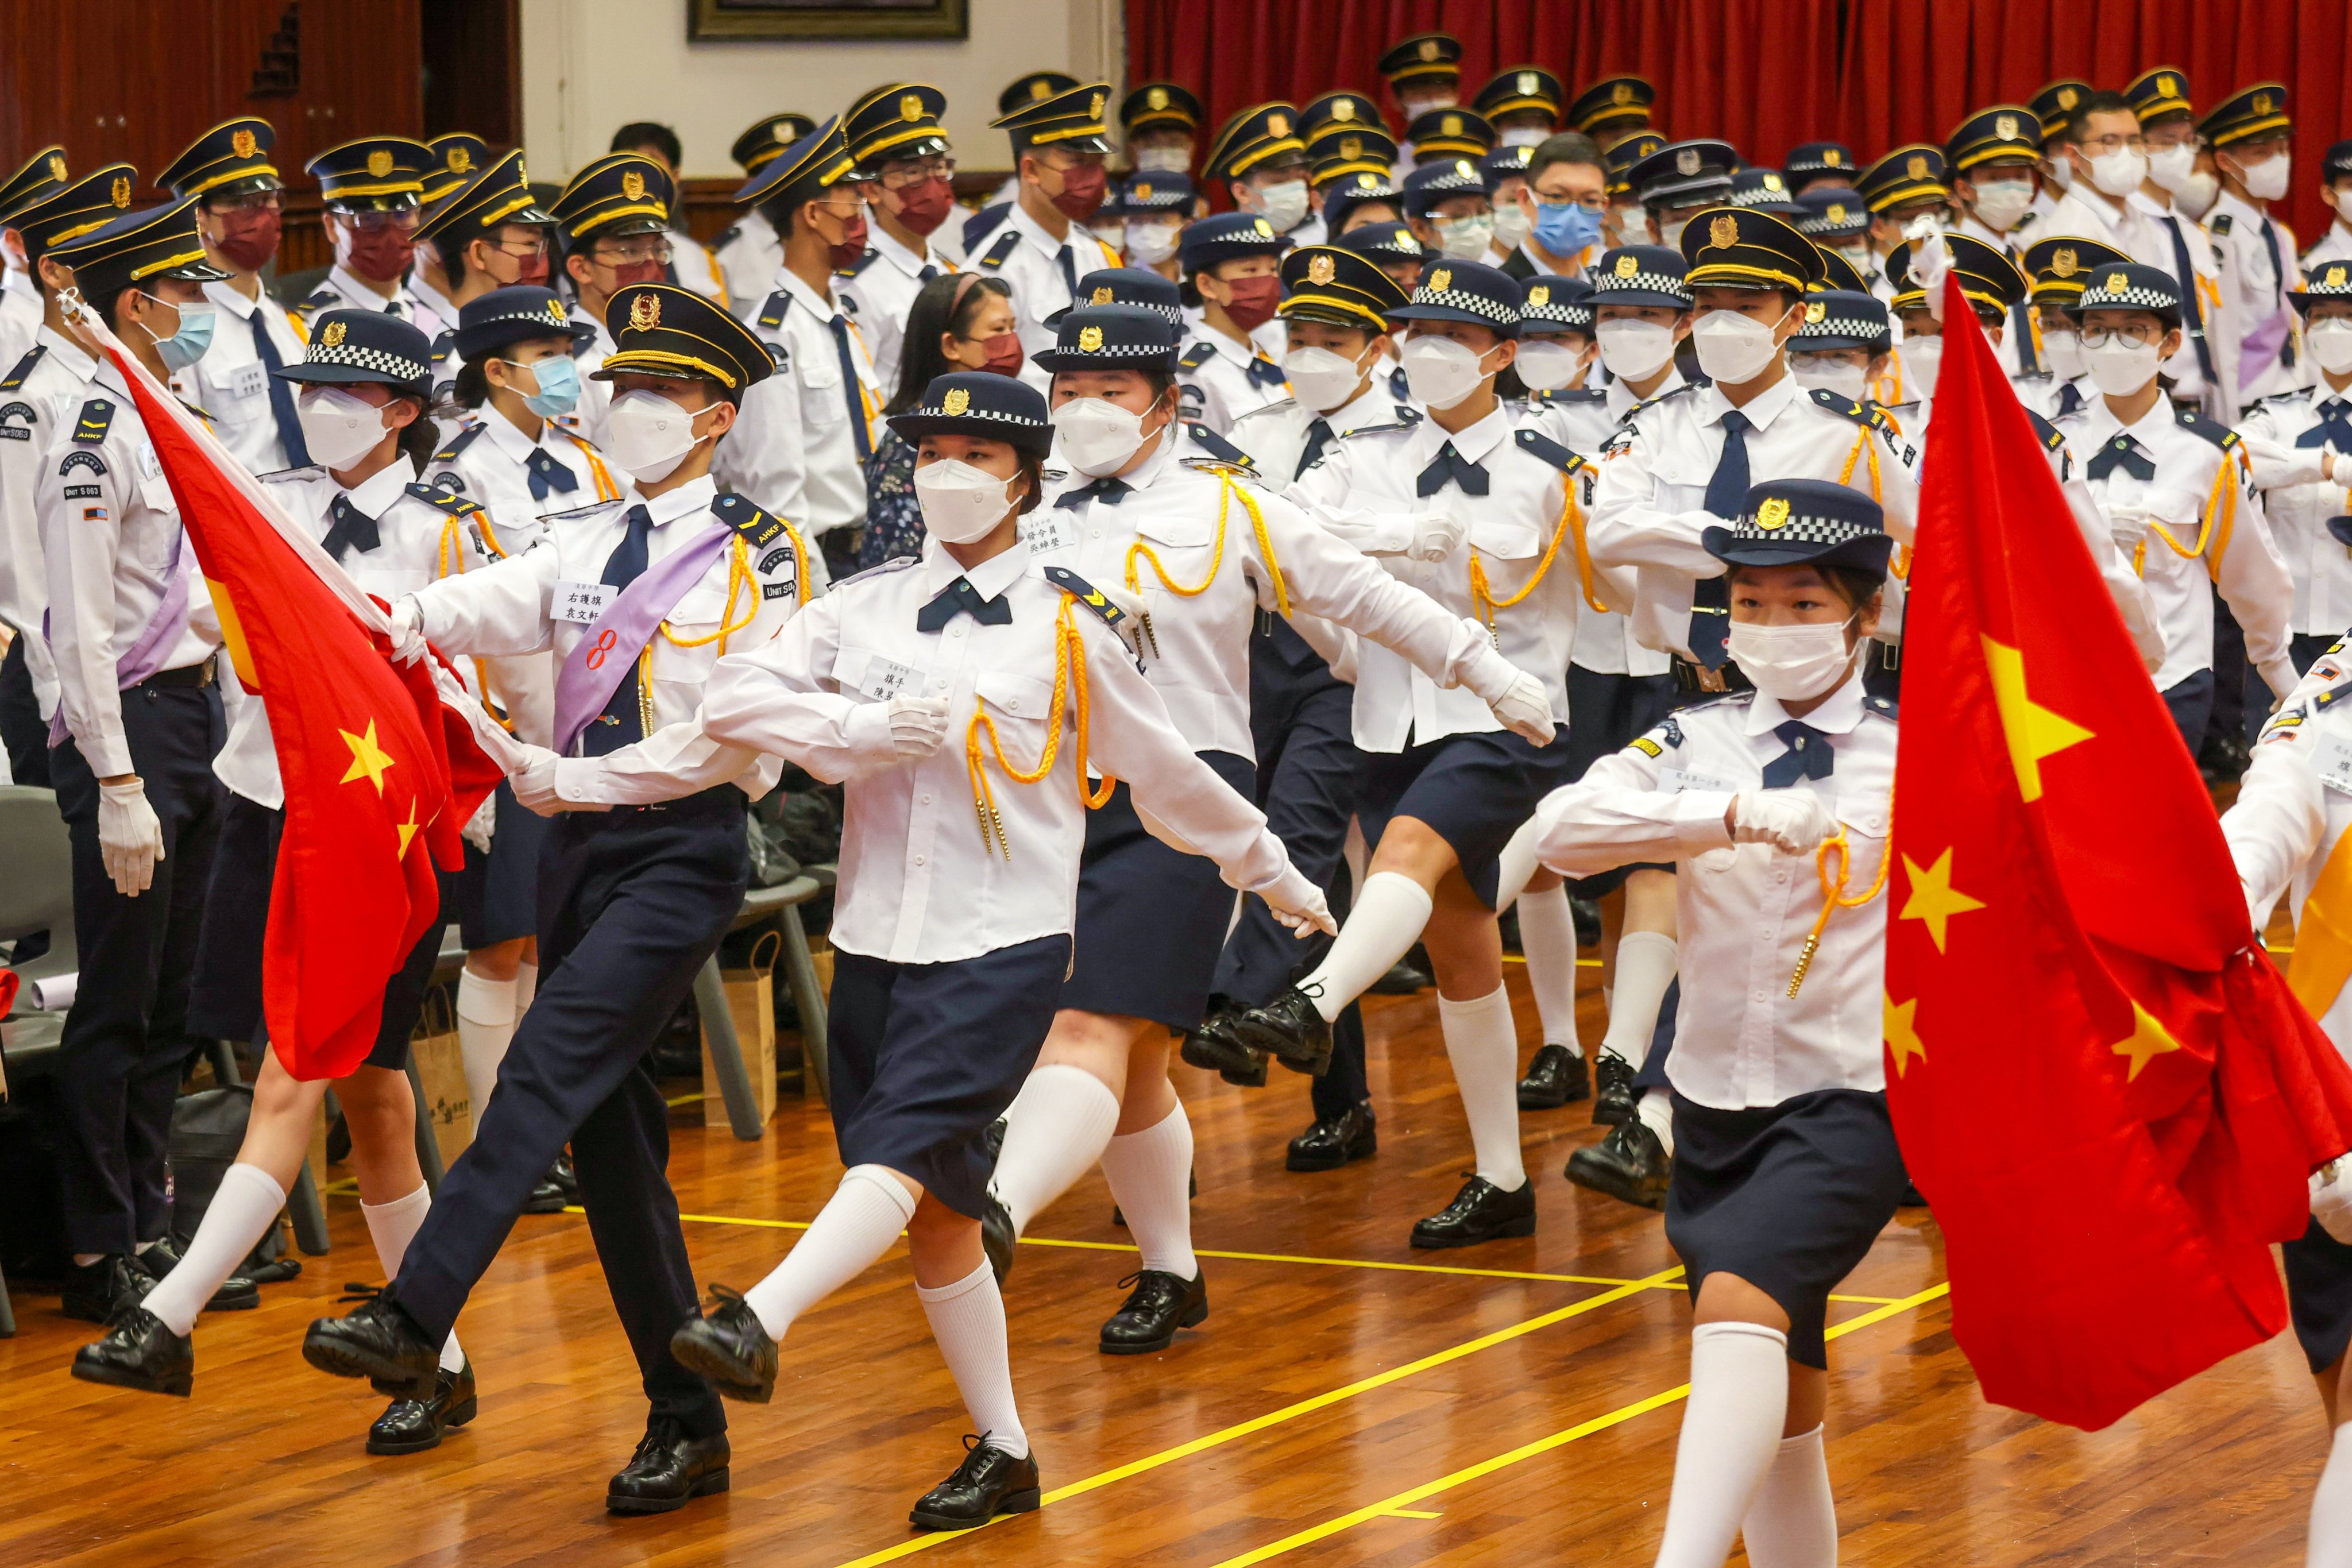 Schools can teach national history and achievements to students through films, cultural events and visits to mainland China, Chief Secretary Eric Chan has said. Photo: Jonathan Wong